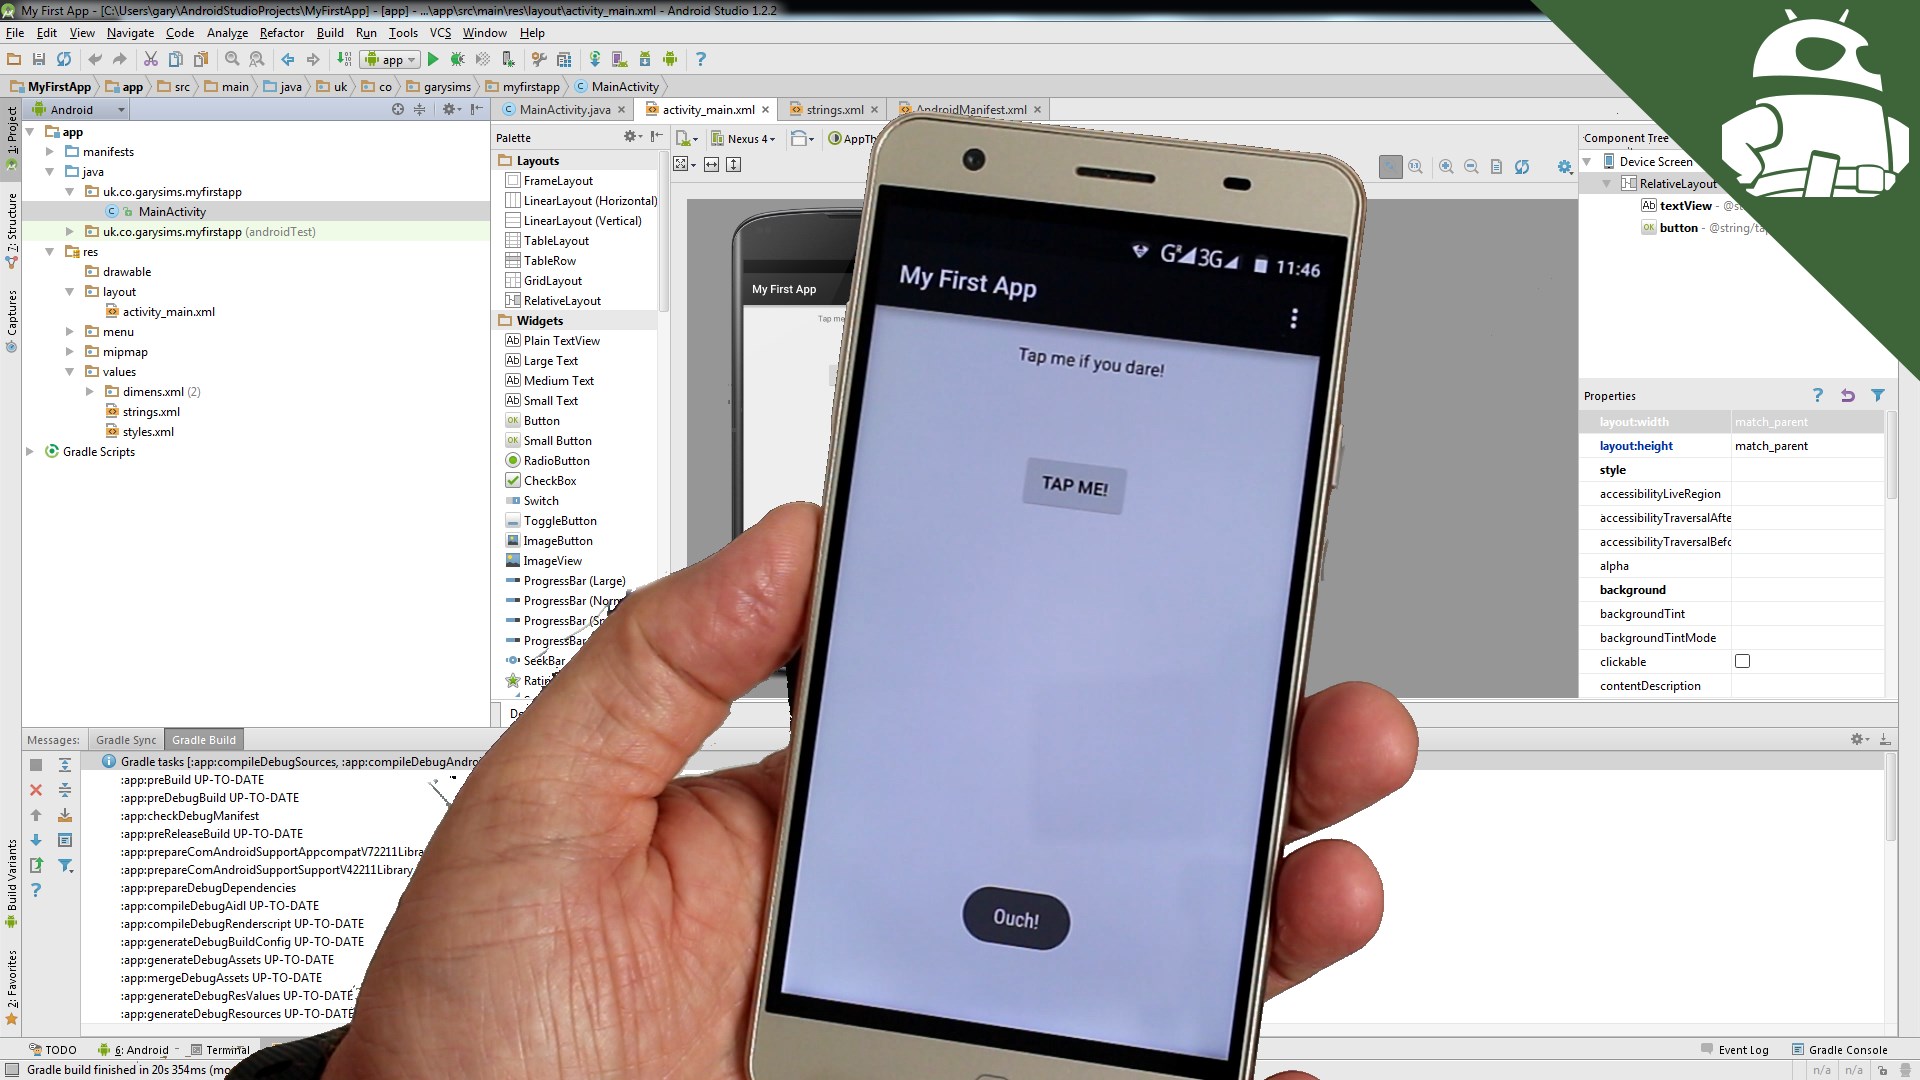 Writing your first Android app - everything you need to know